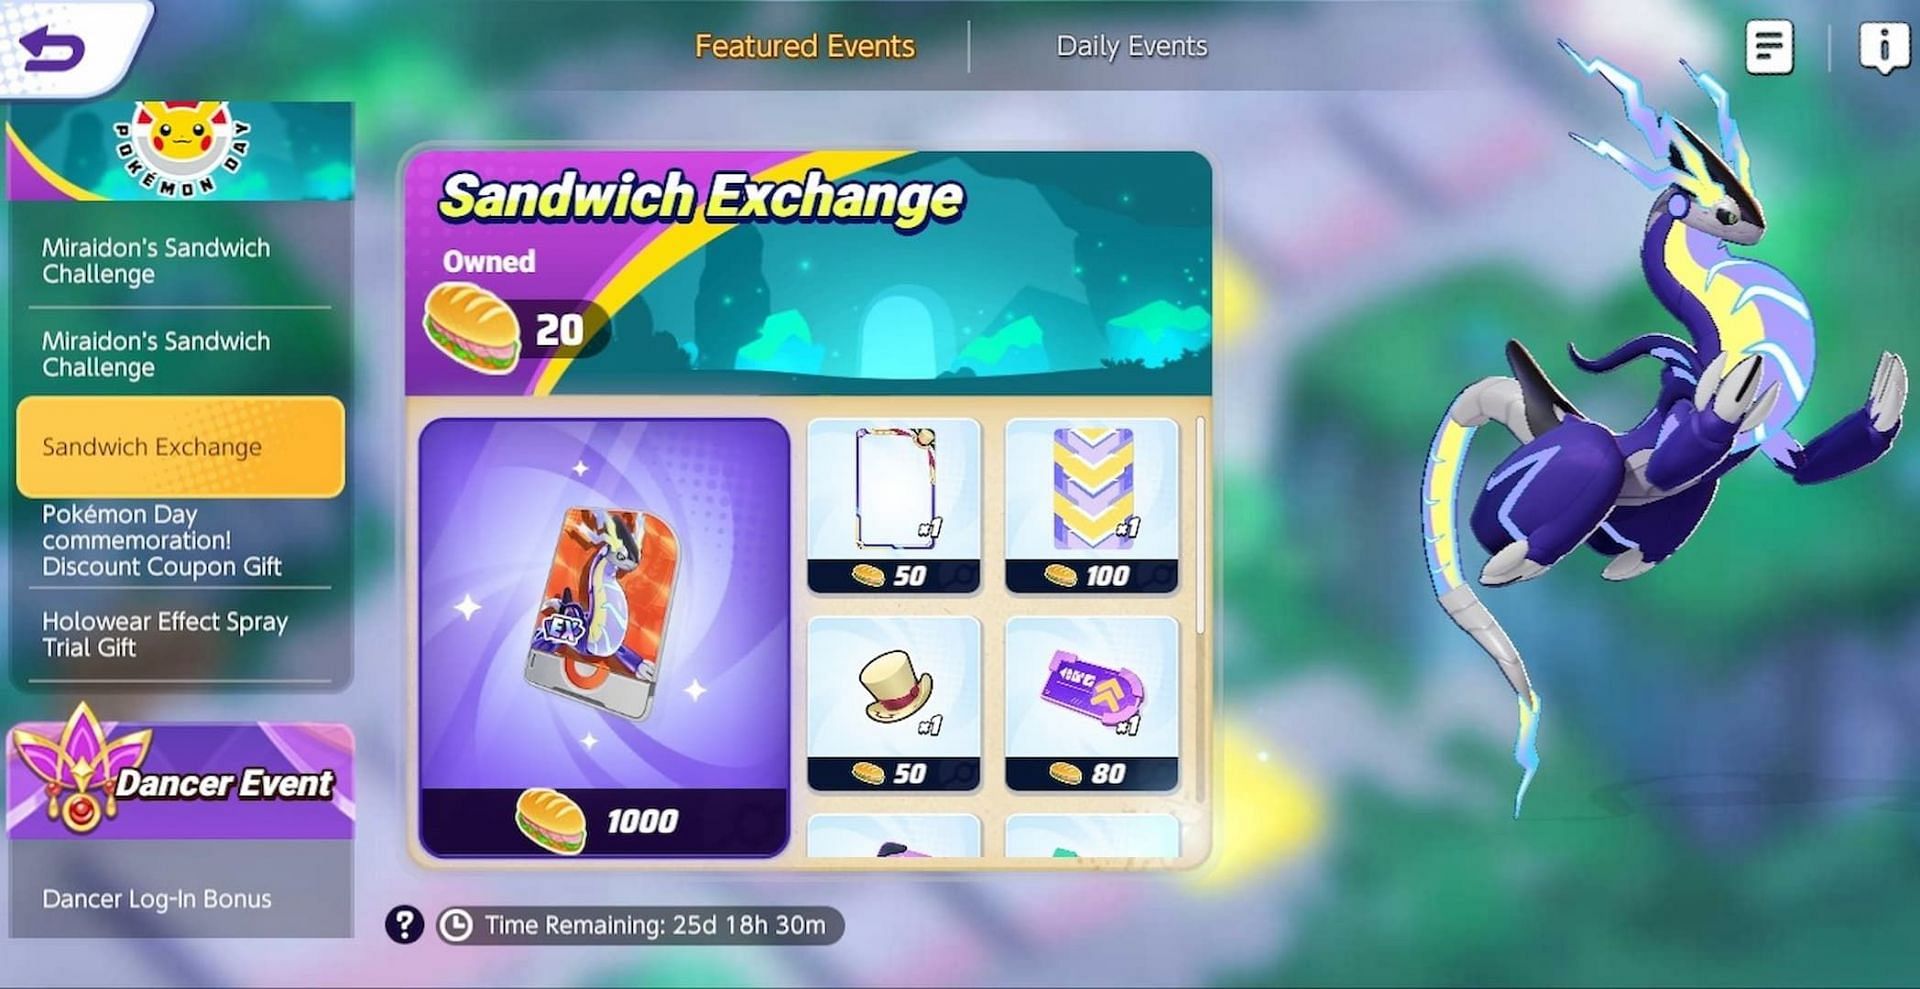 You can get Miraidon in exchange for 1000 sandwiches (Image via The Pokemon Company)